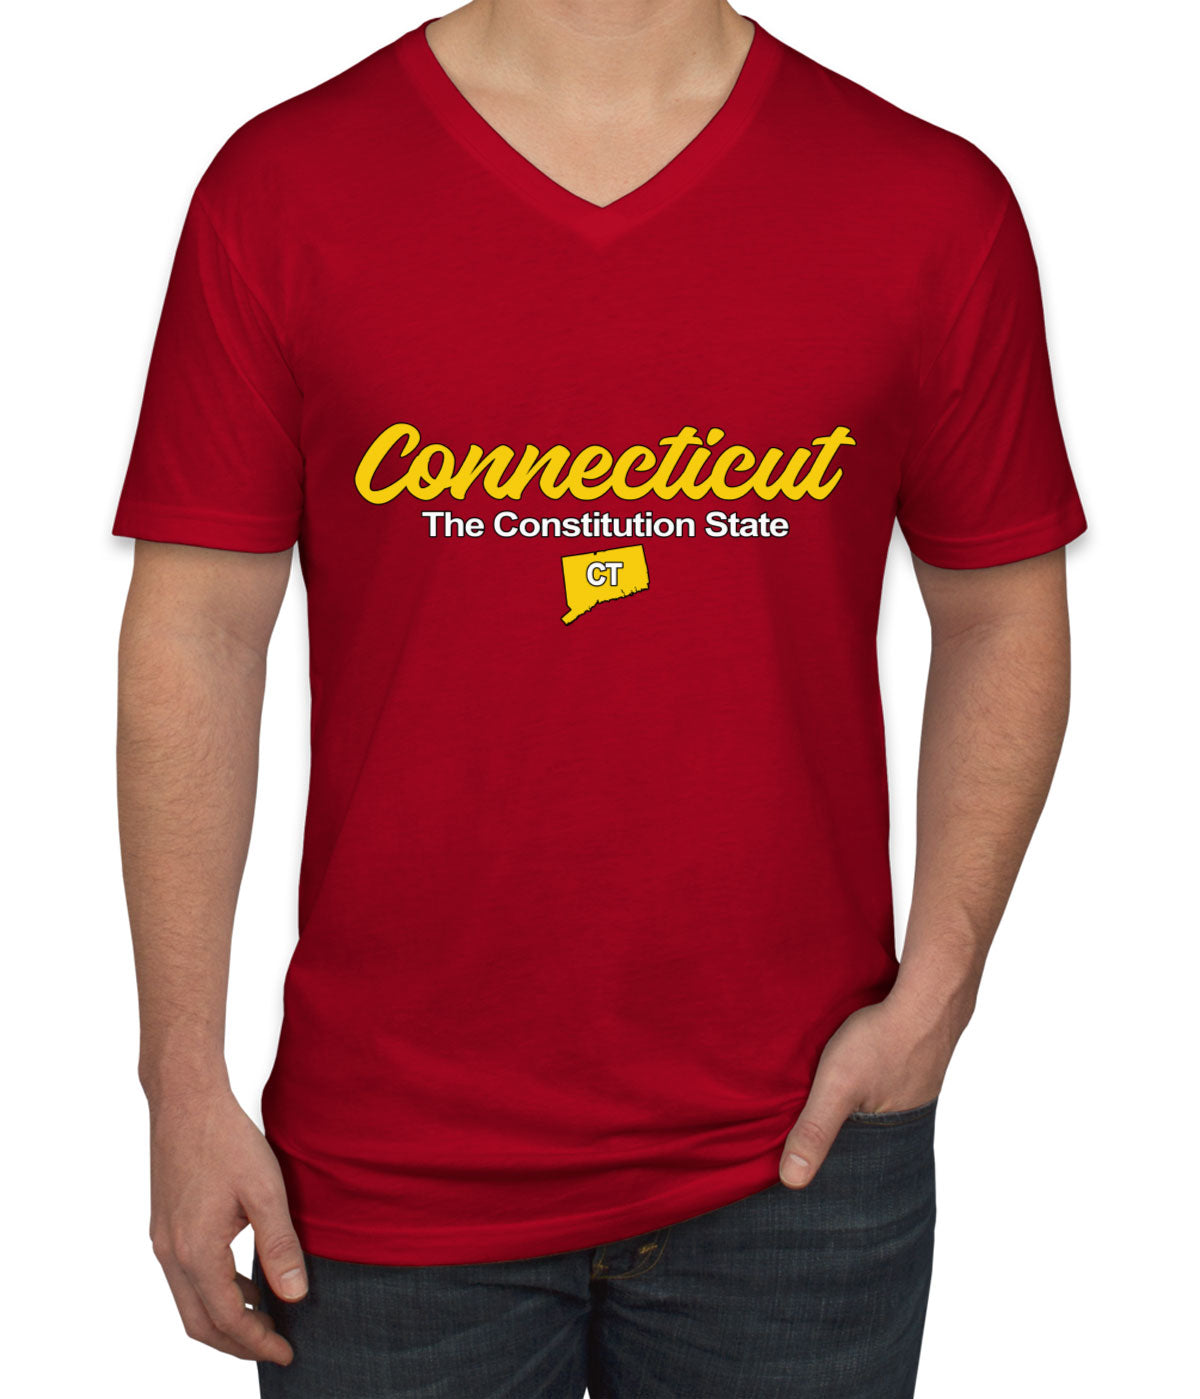 Connecticut The Constitution State Men's V Neck T-shirt